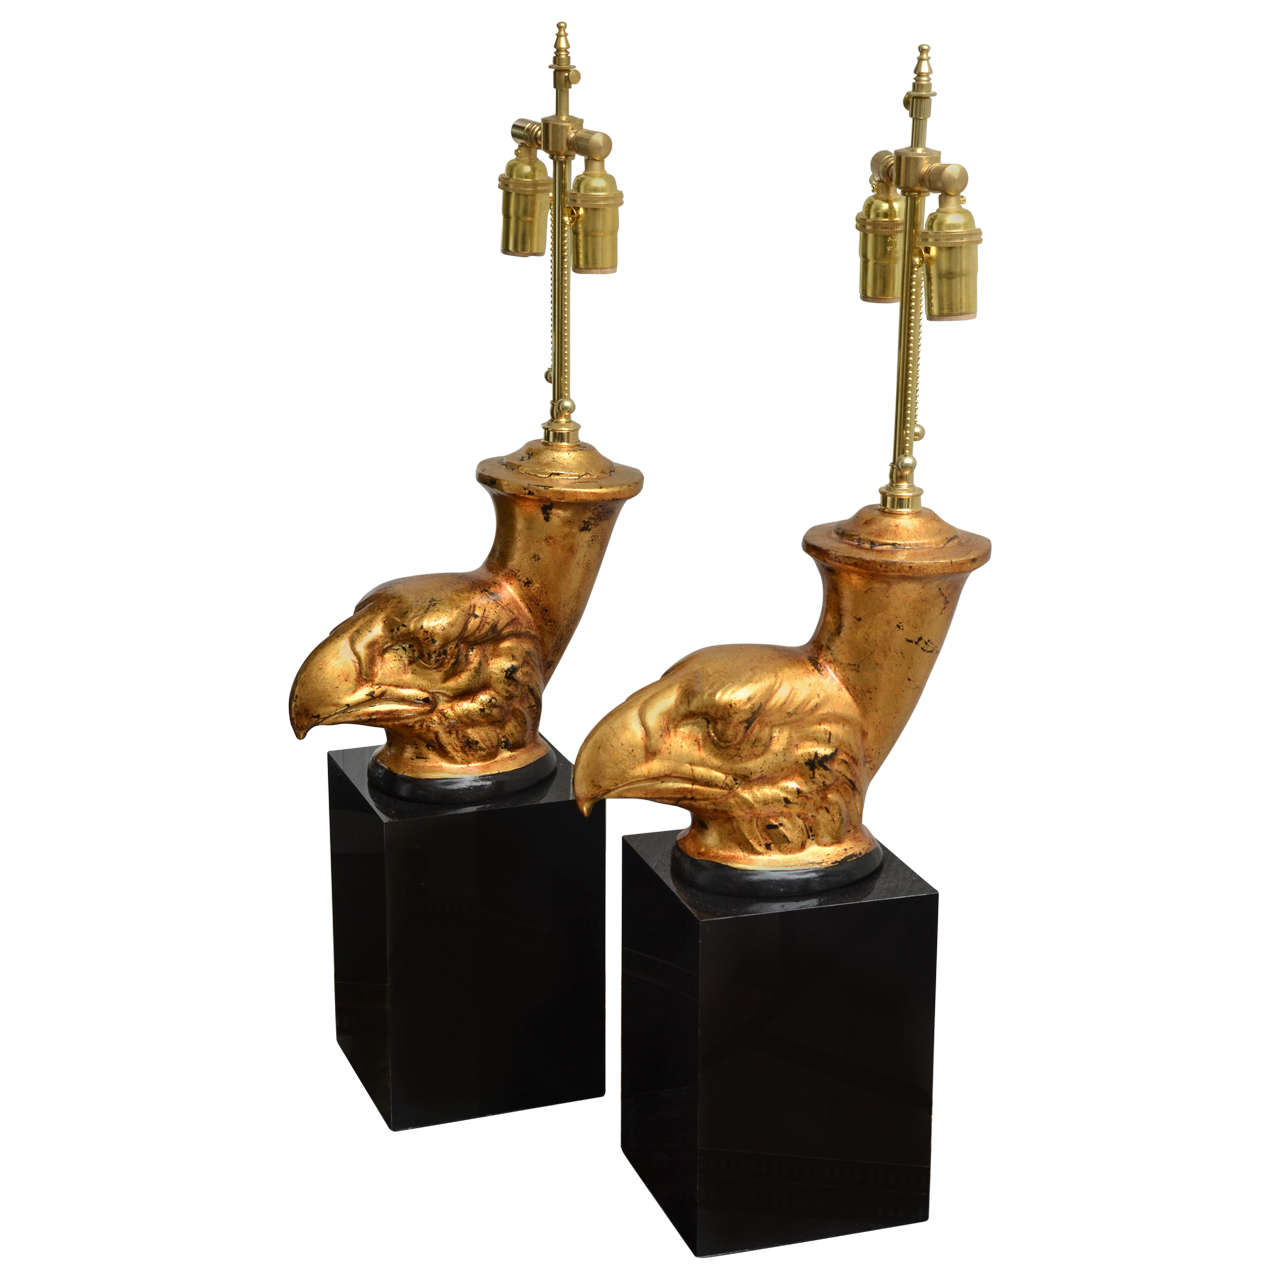 Pair of Gilded Eagle Head Table Lamps with Black Lucite Bases